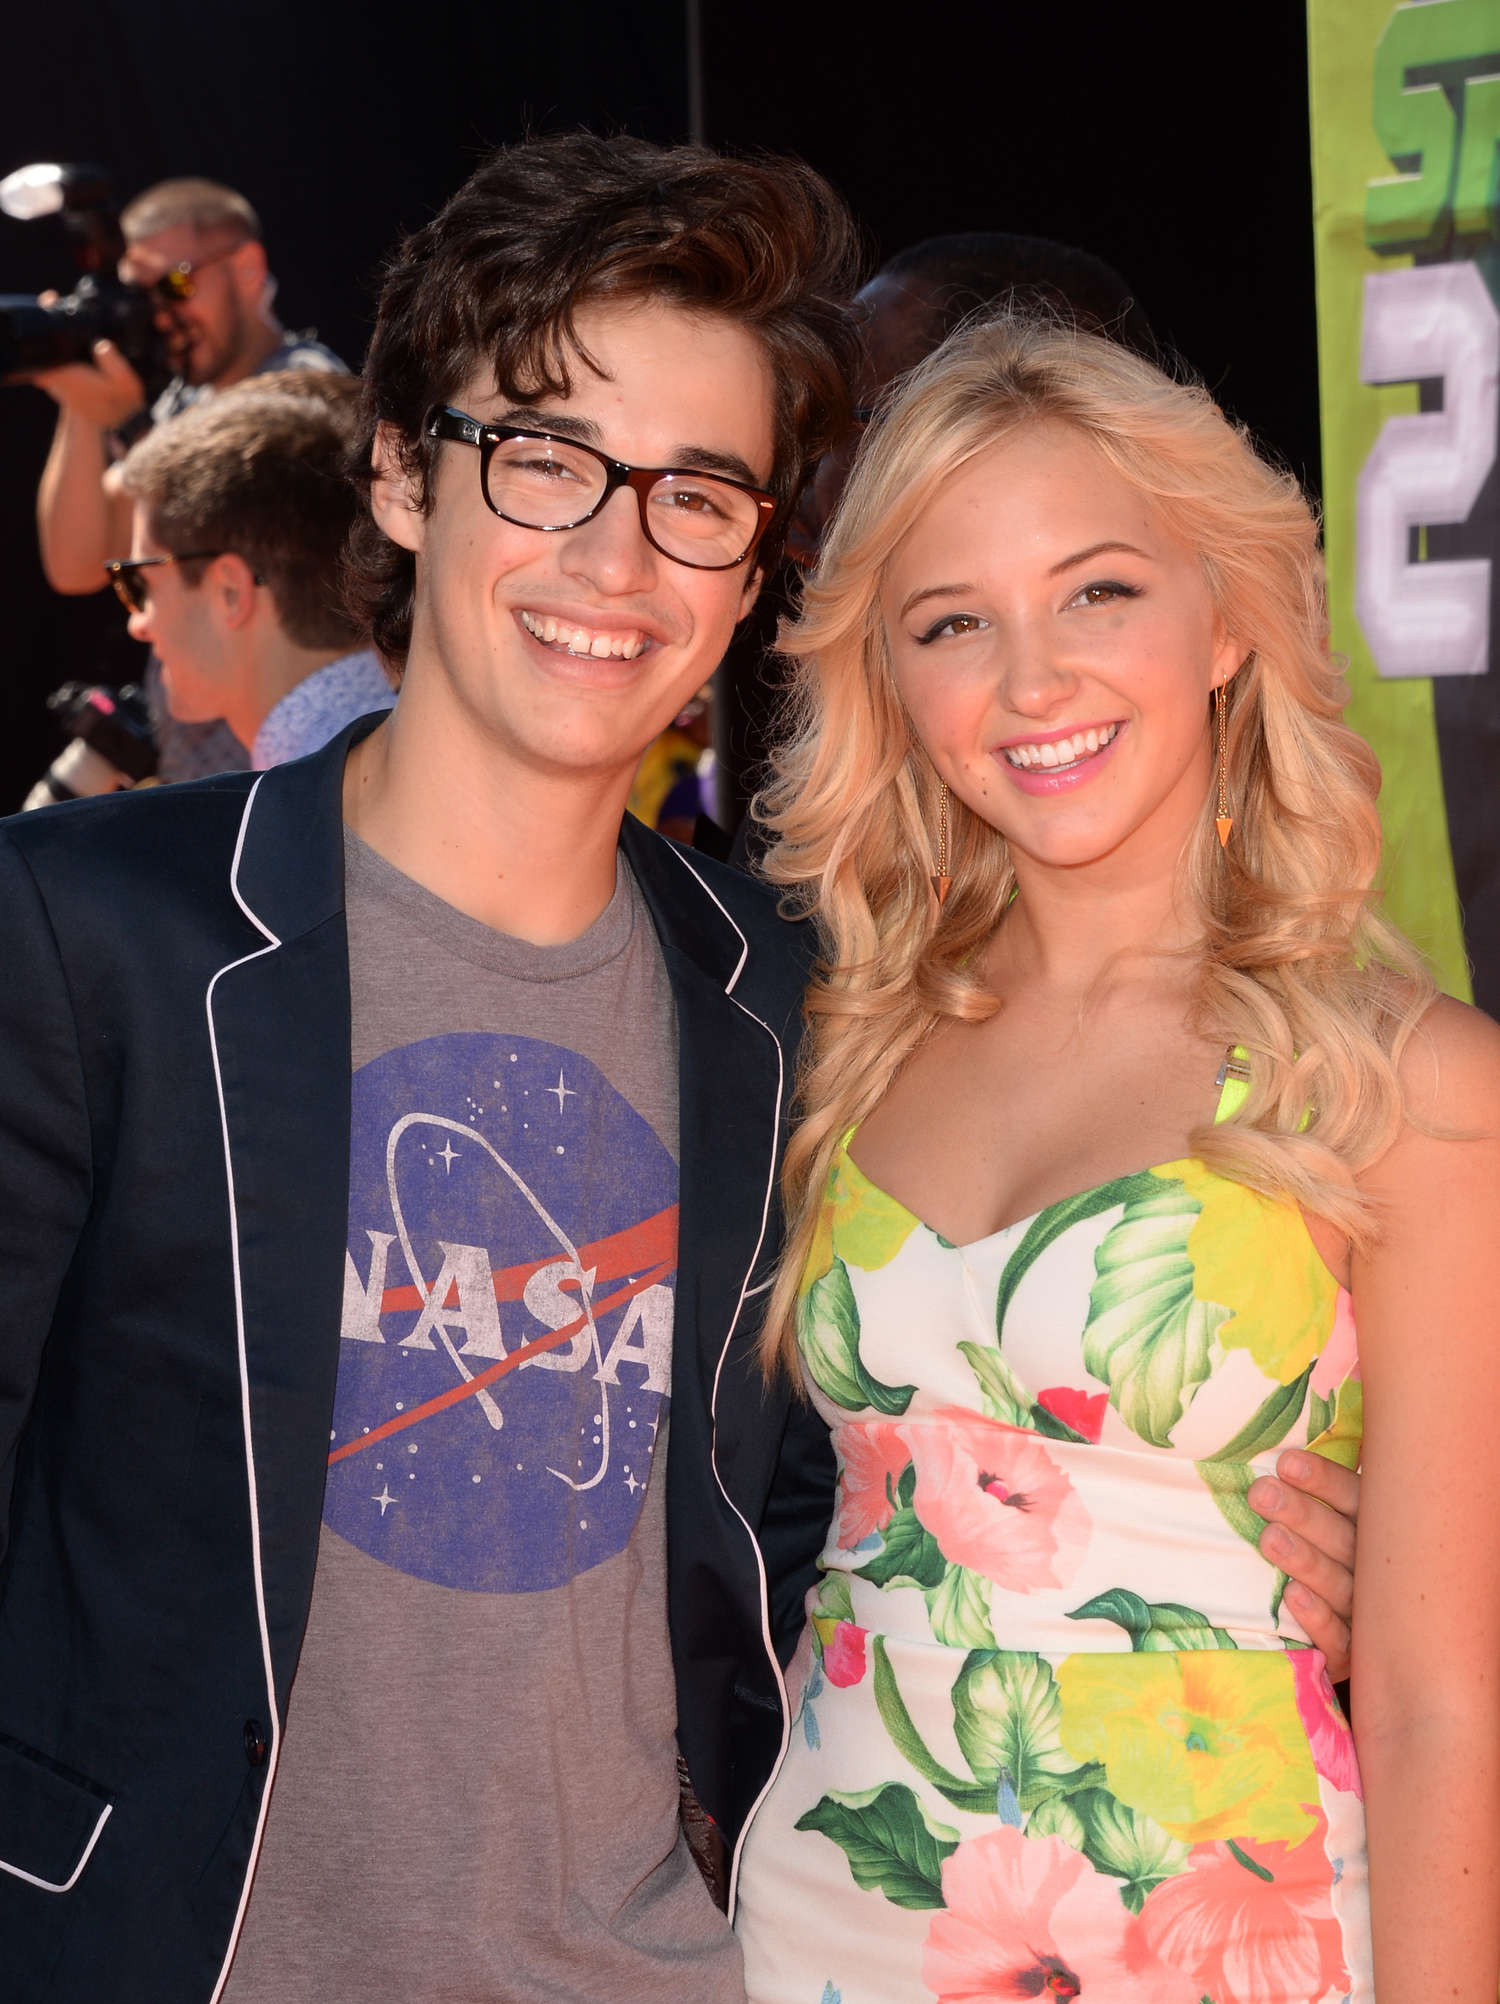 Audrey whitby and joey bragg